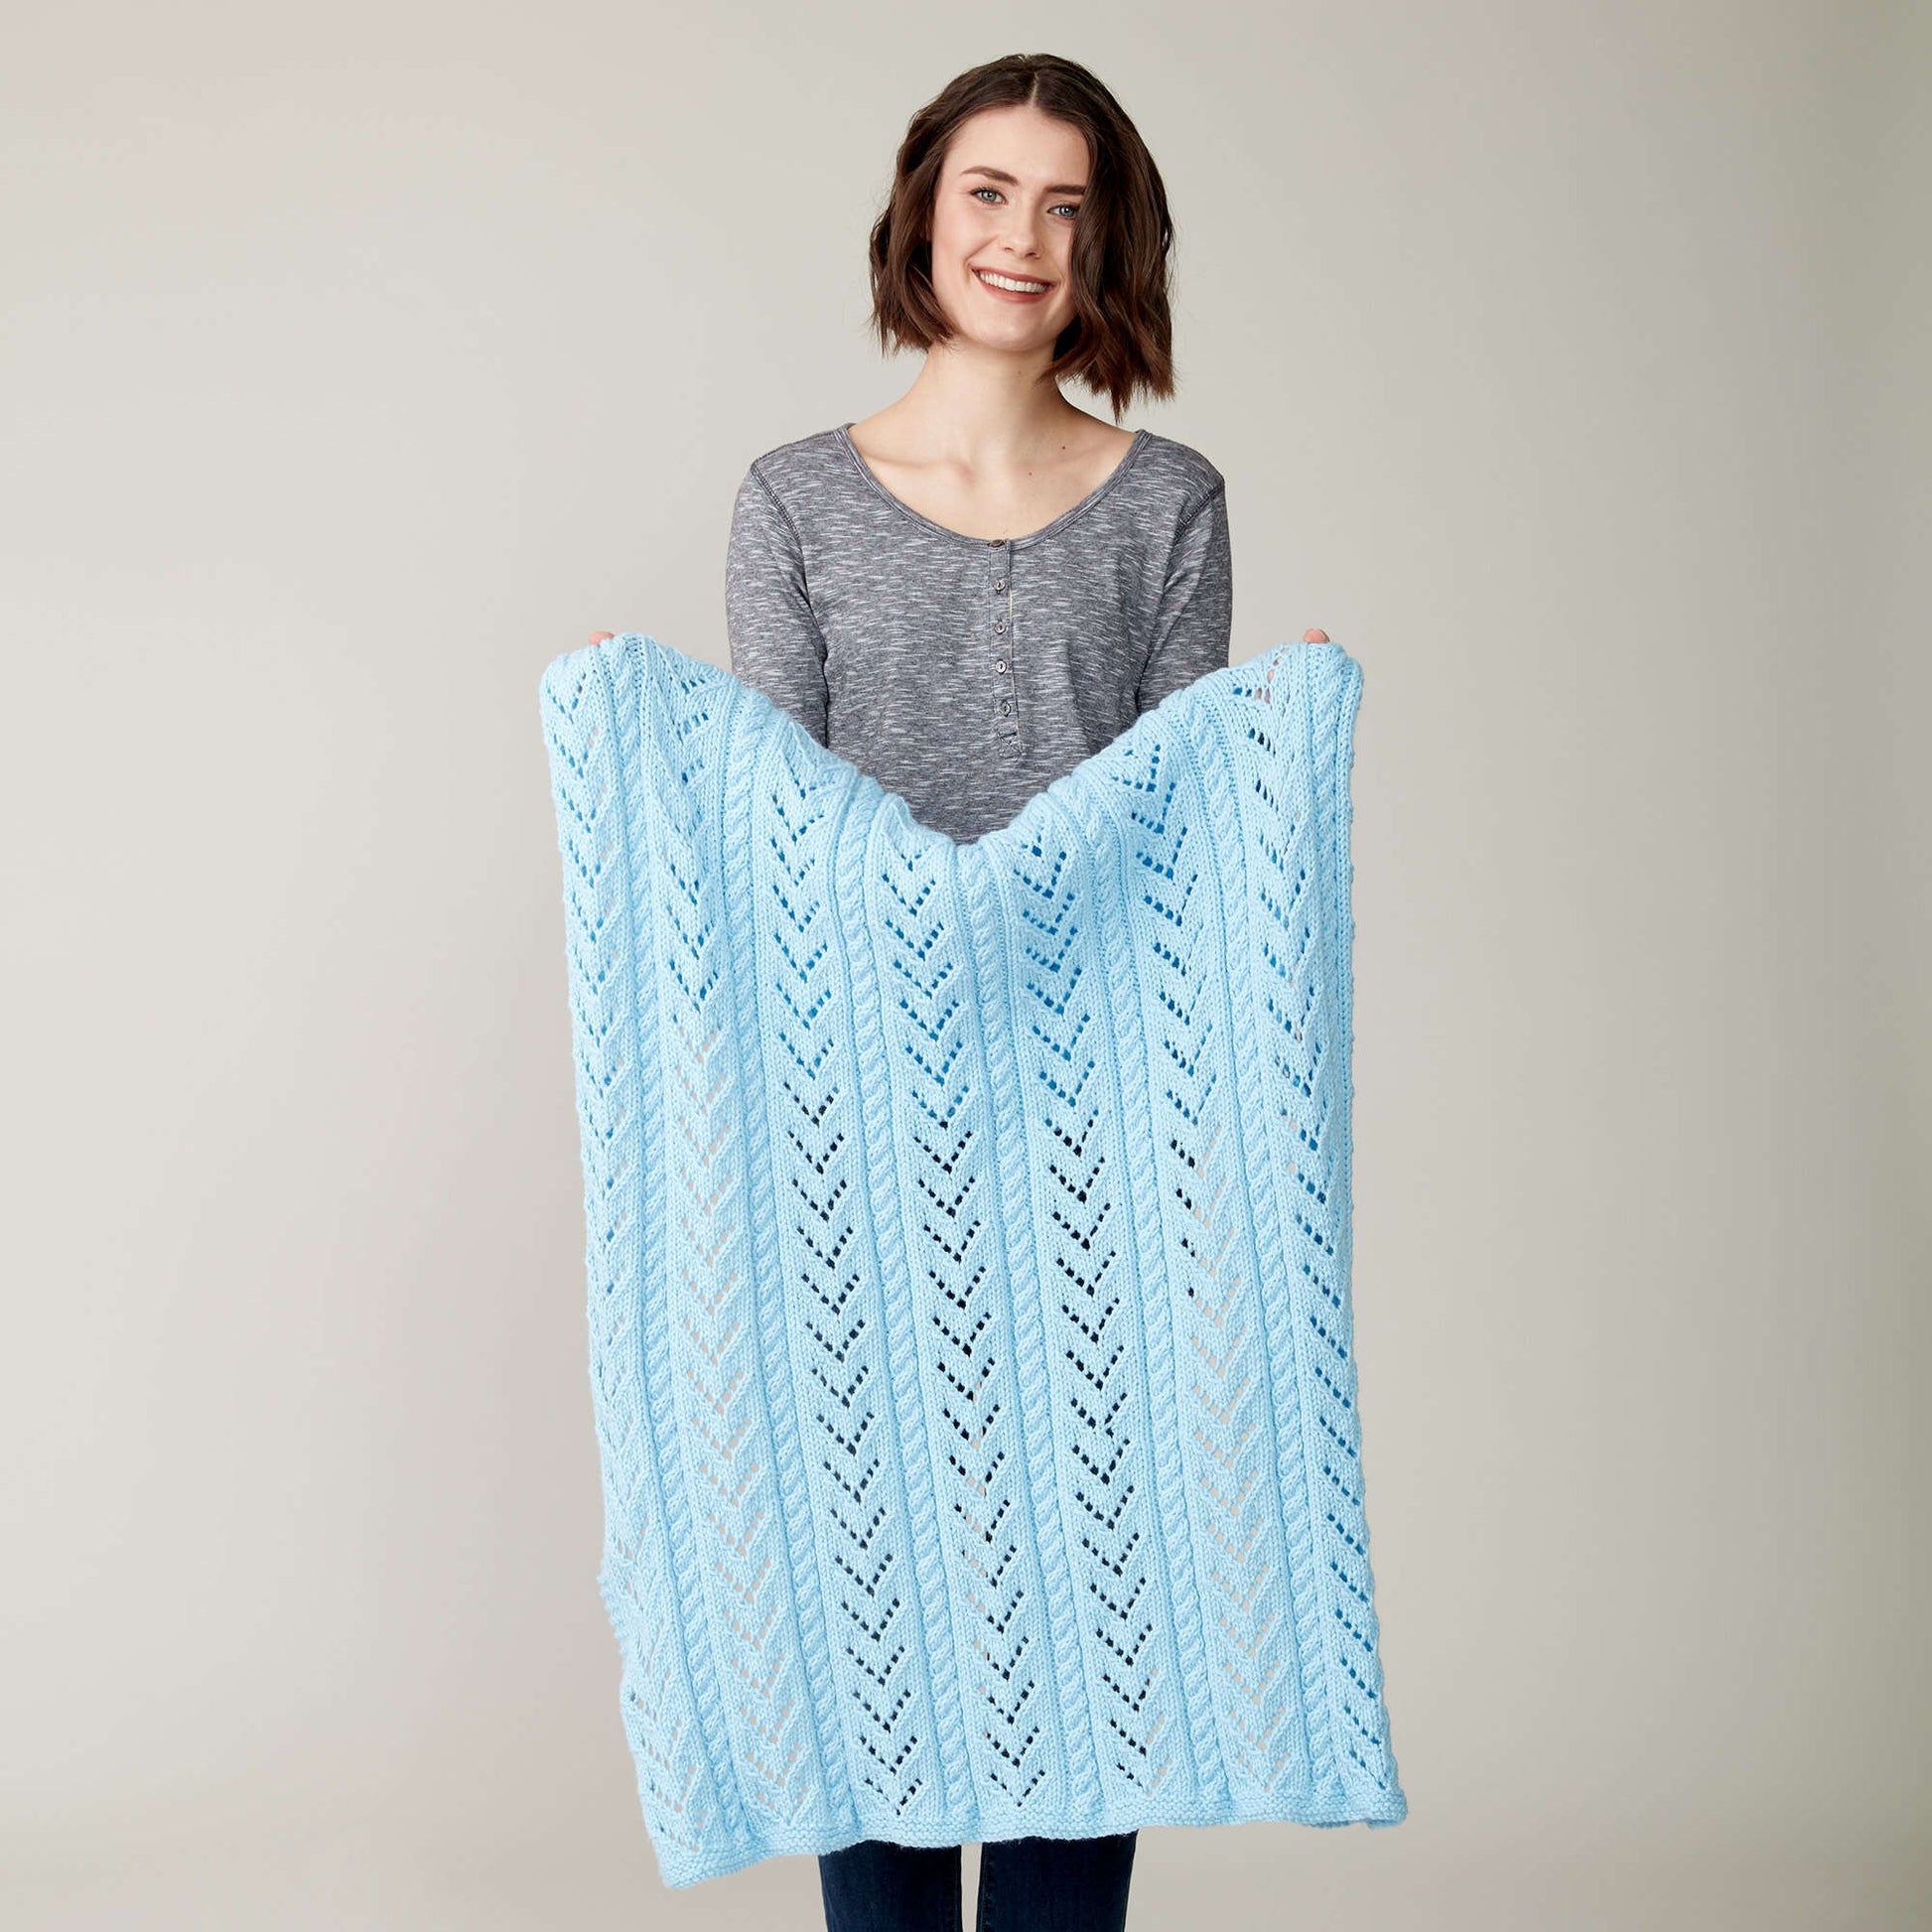 Free Caron Lace And Cables Knit Baby Blanket Pattern